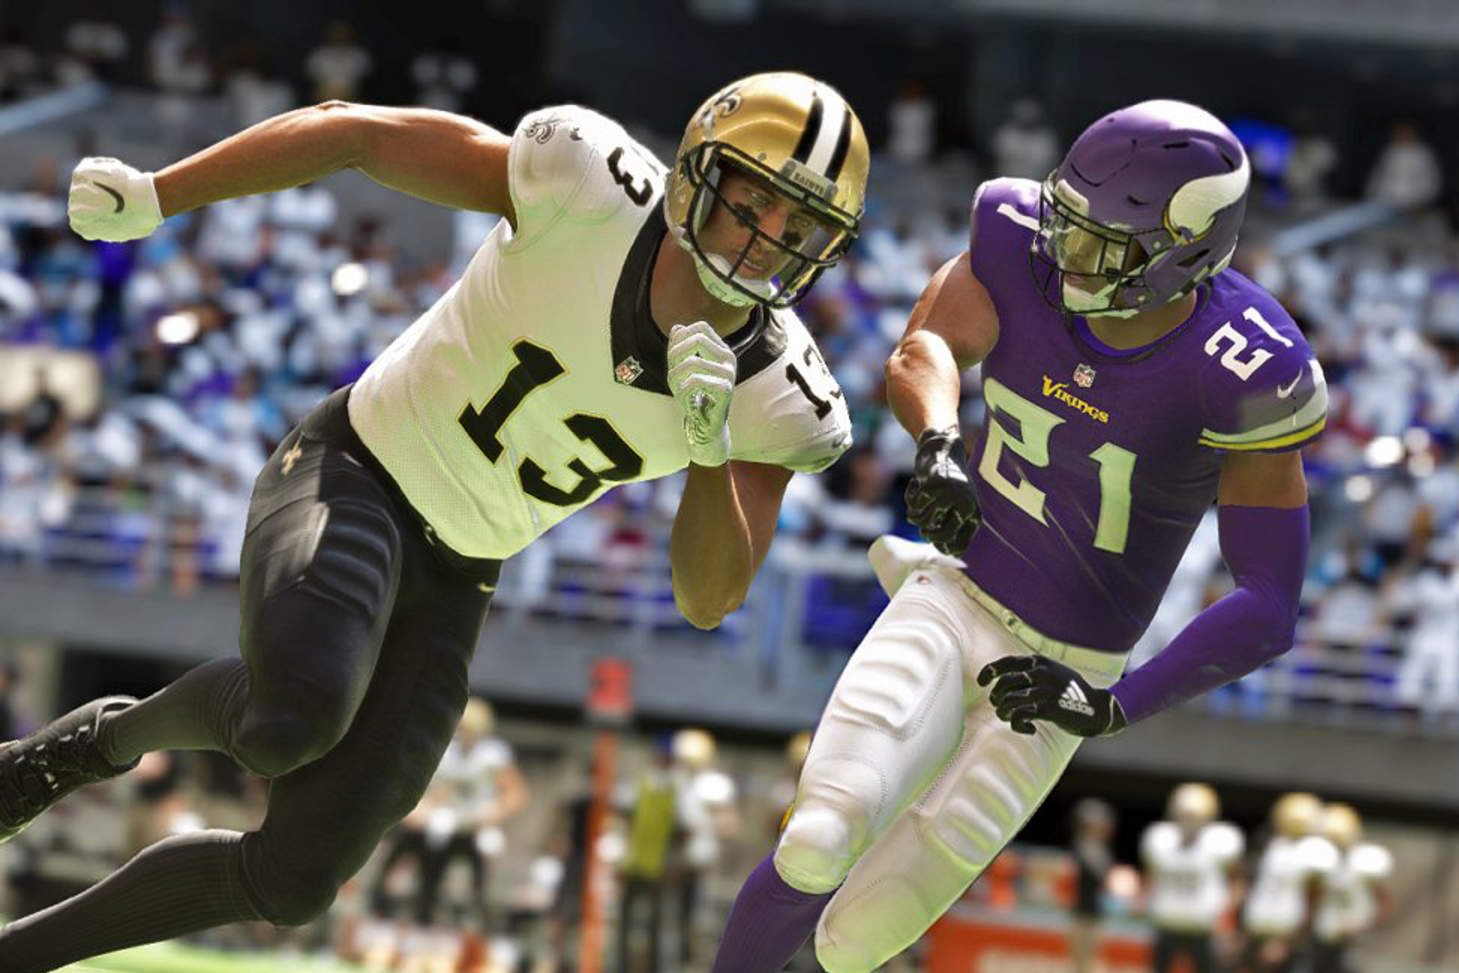 Madden 22: How to Call an Audible, and Why You Should